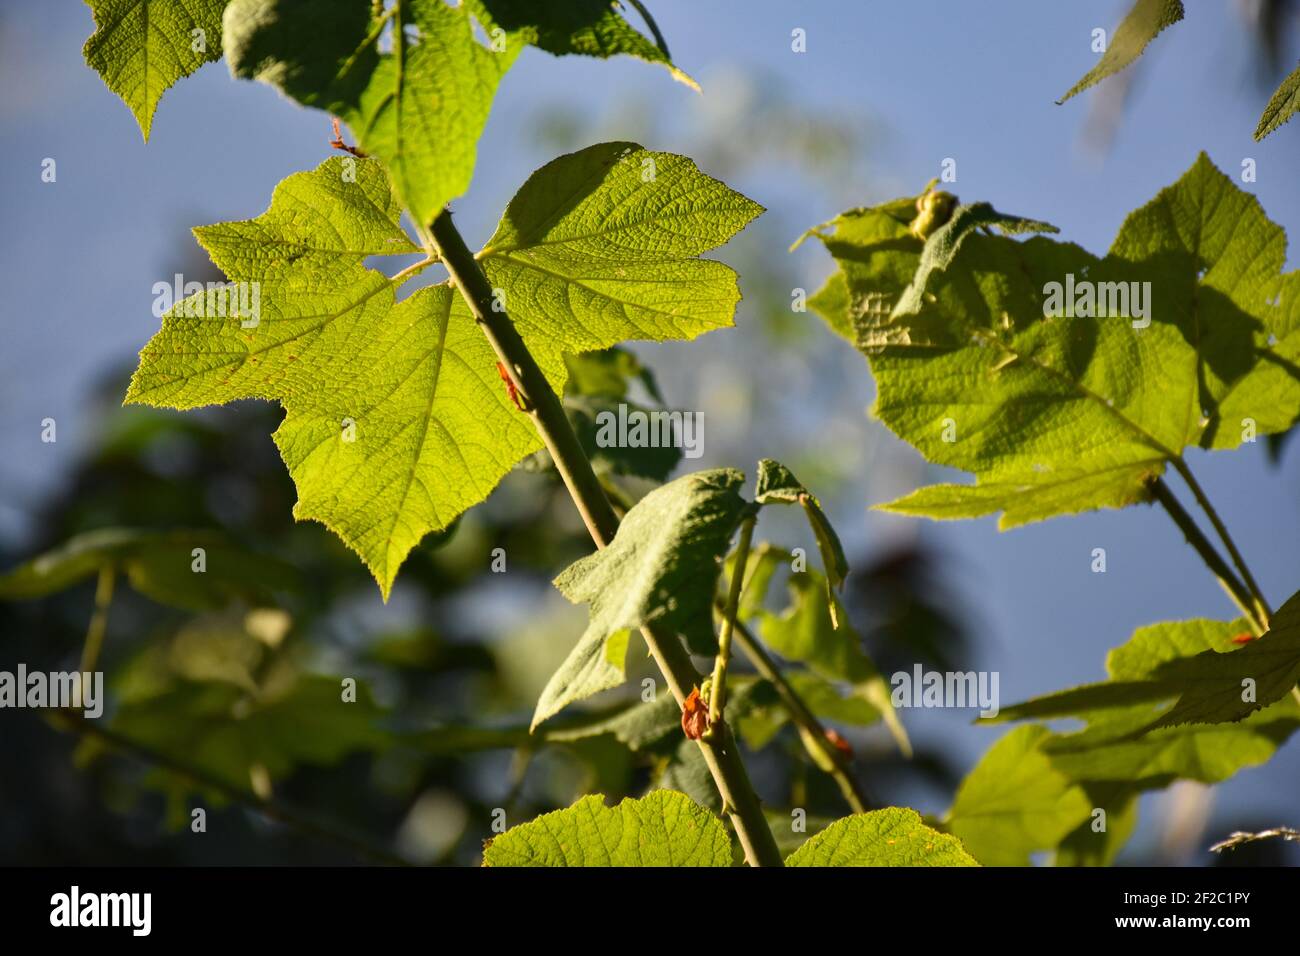 Leaves and stems of currant. Wild berry. abundantly available in Kalimpong Forest Stock Photo